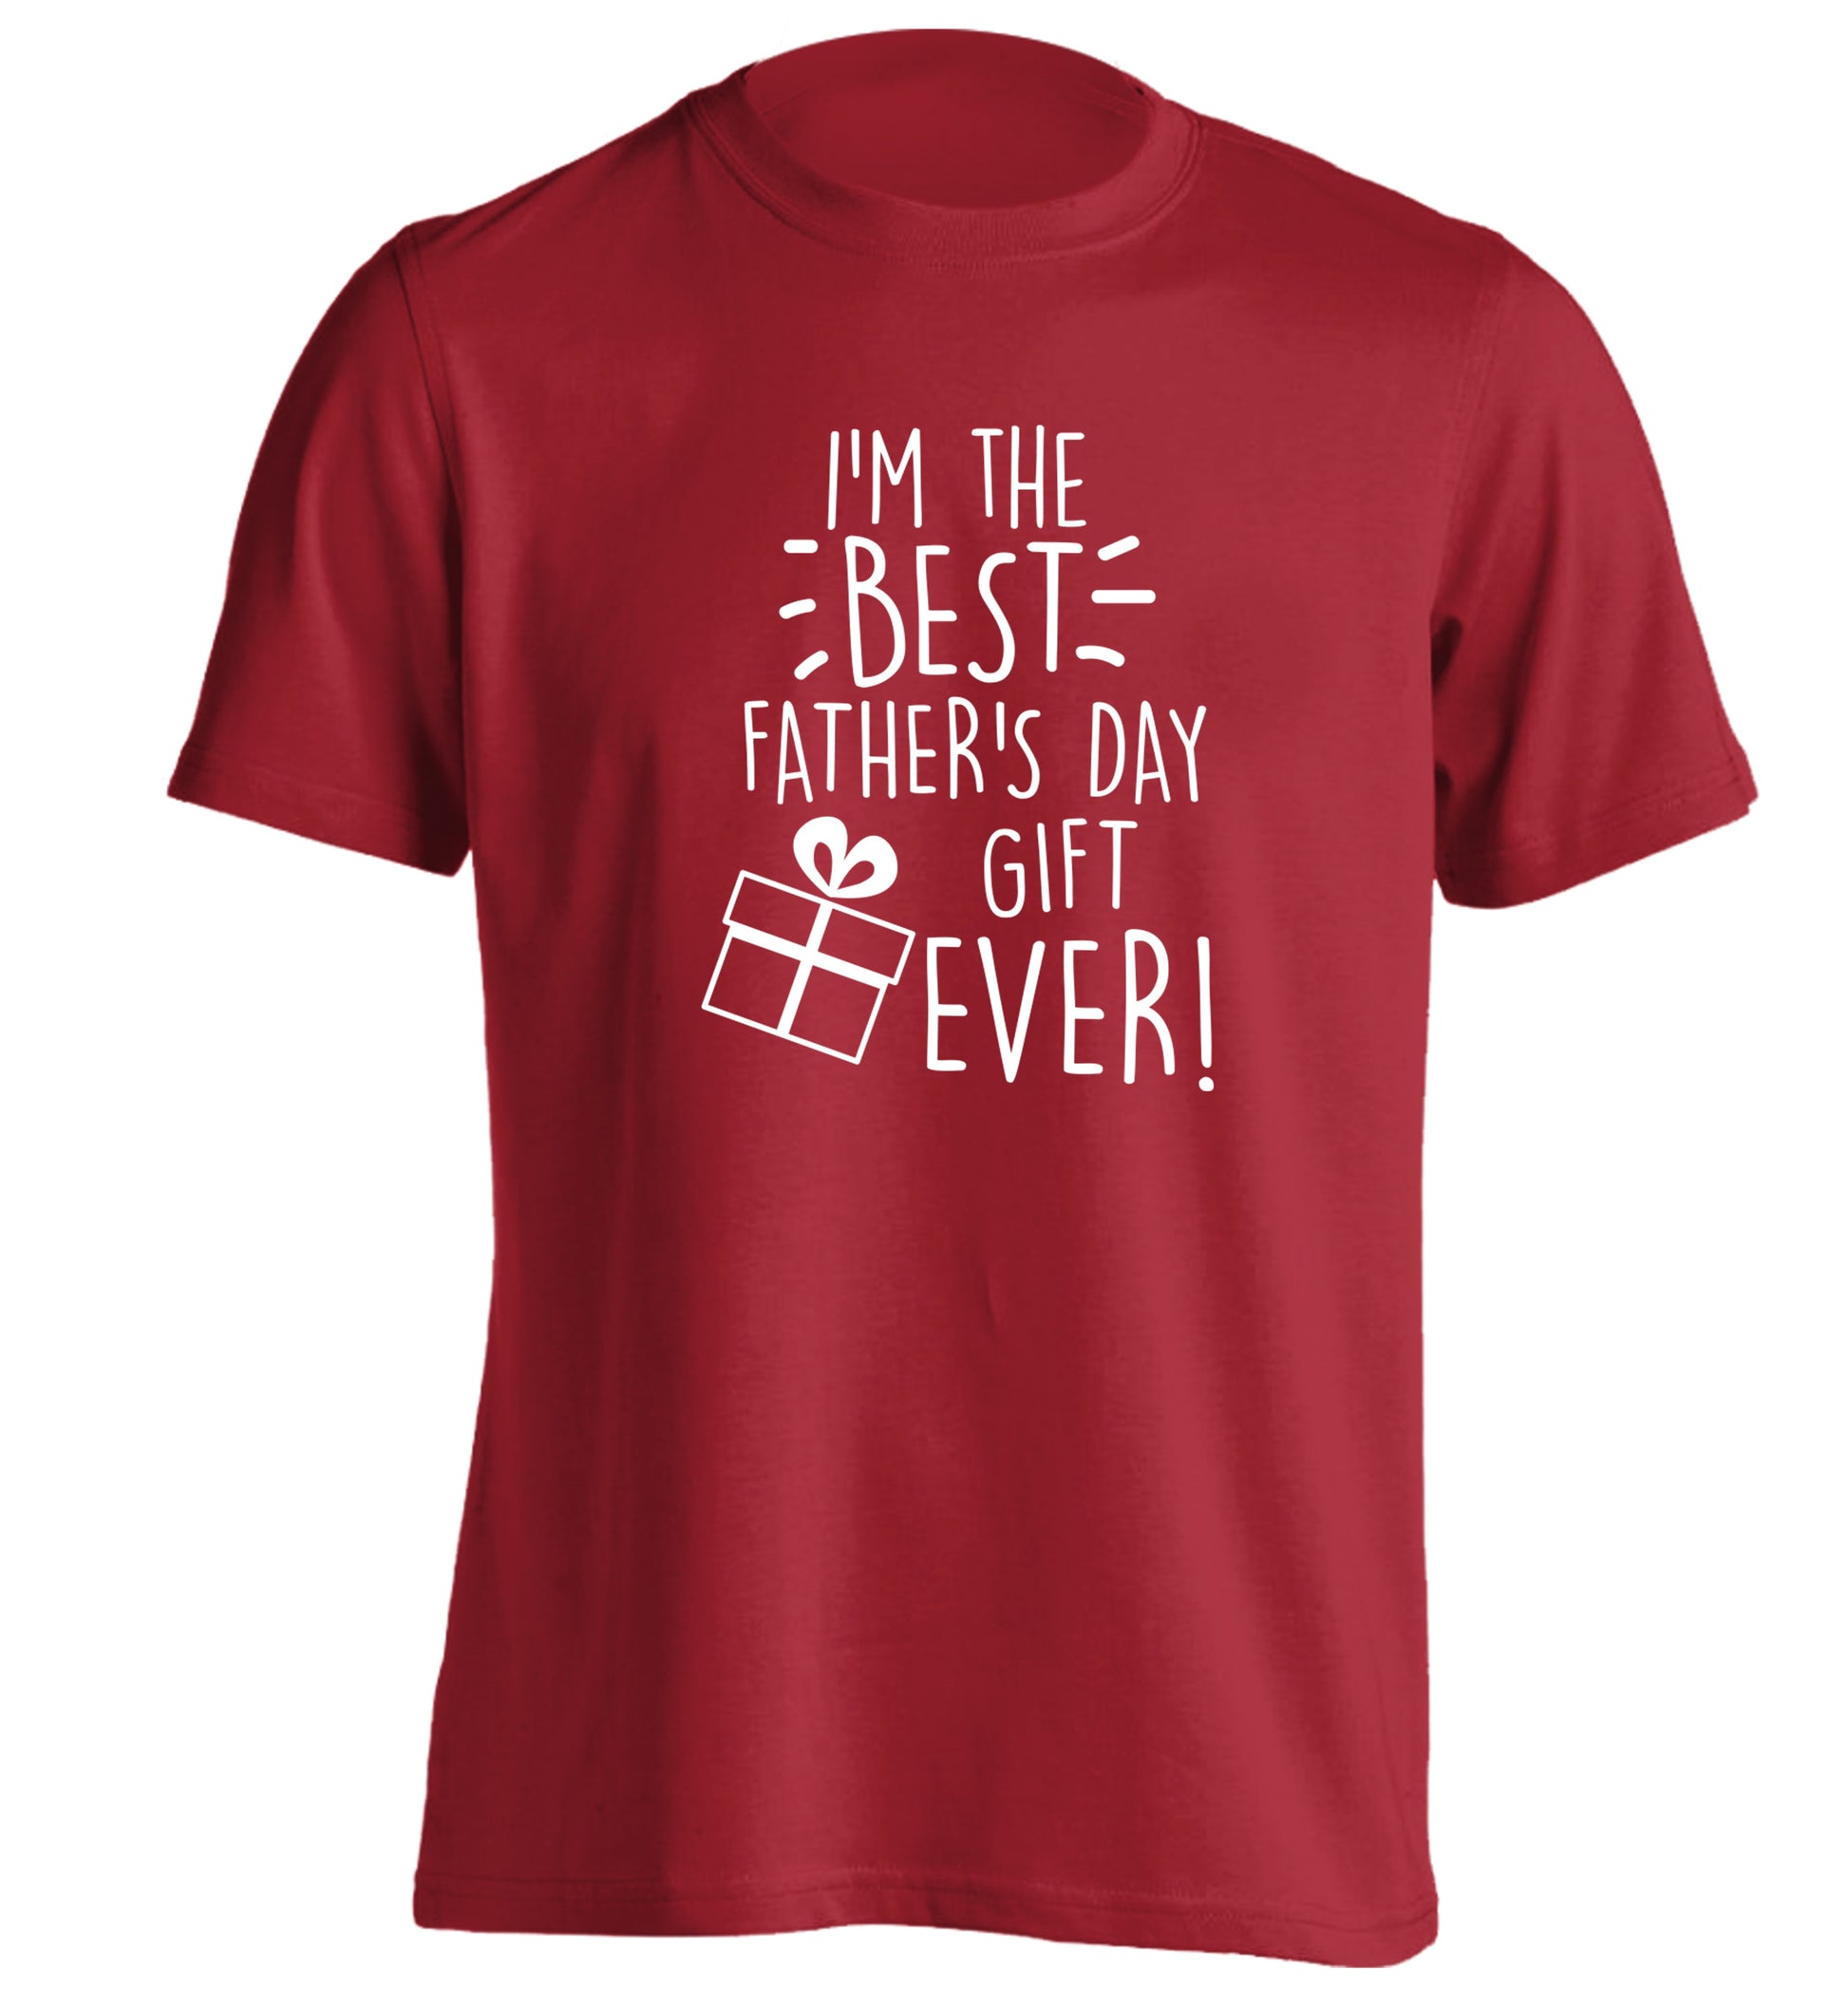 I'm the BEST father's day gift ever! adults unisex red Tshirt 2XL